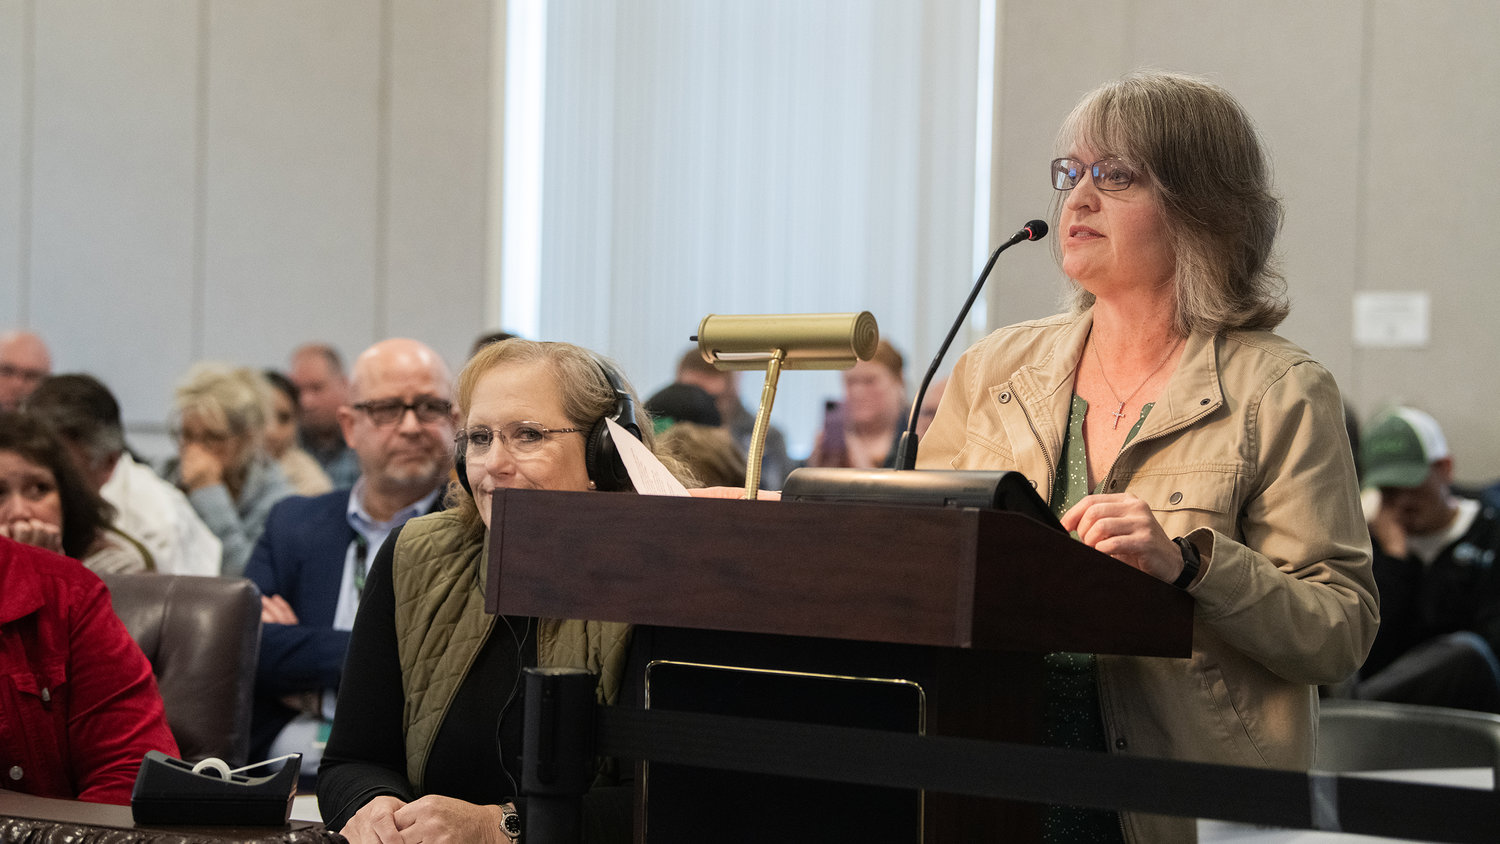 Patty Howard speaks out in opposition to an ordinance prohibiting unauthorized camping on county land and adopting a resolution for homeless camp removals and site clean ups on Tuesday in Chehalis.